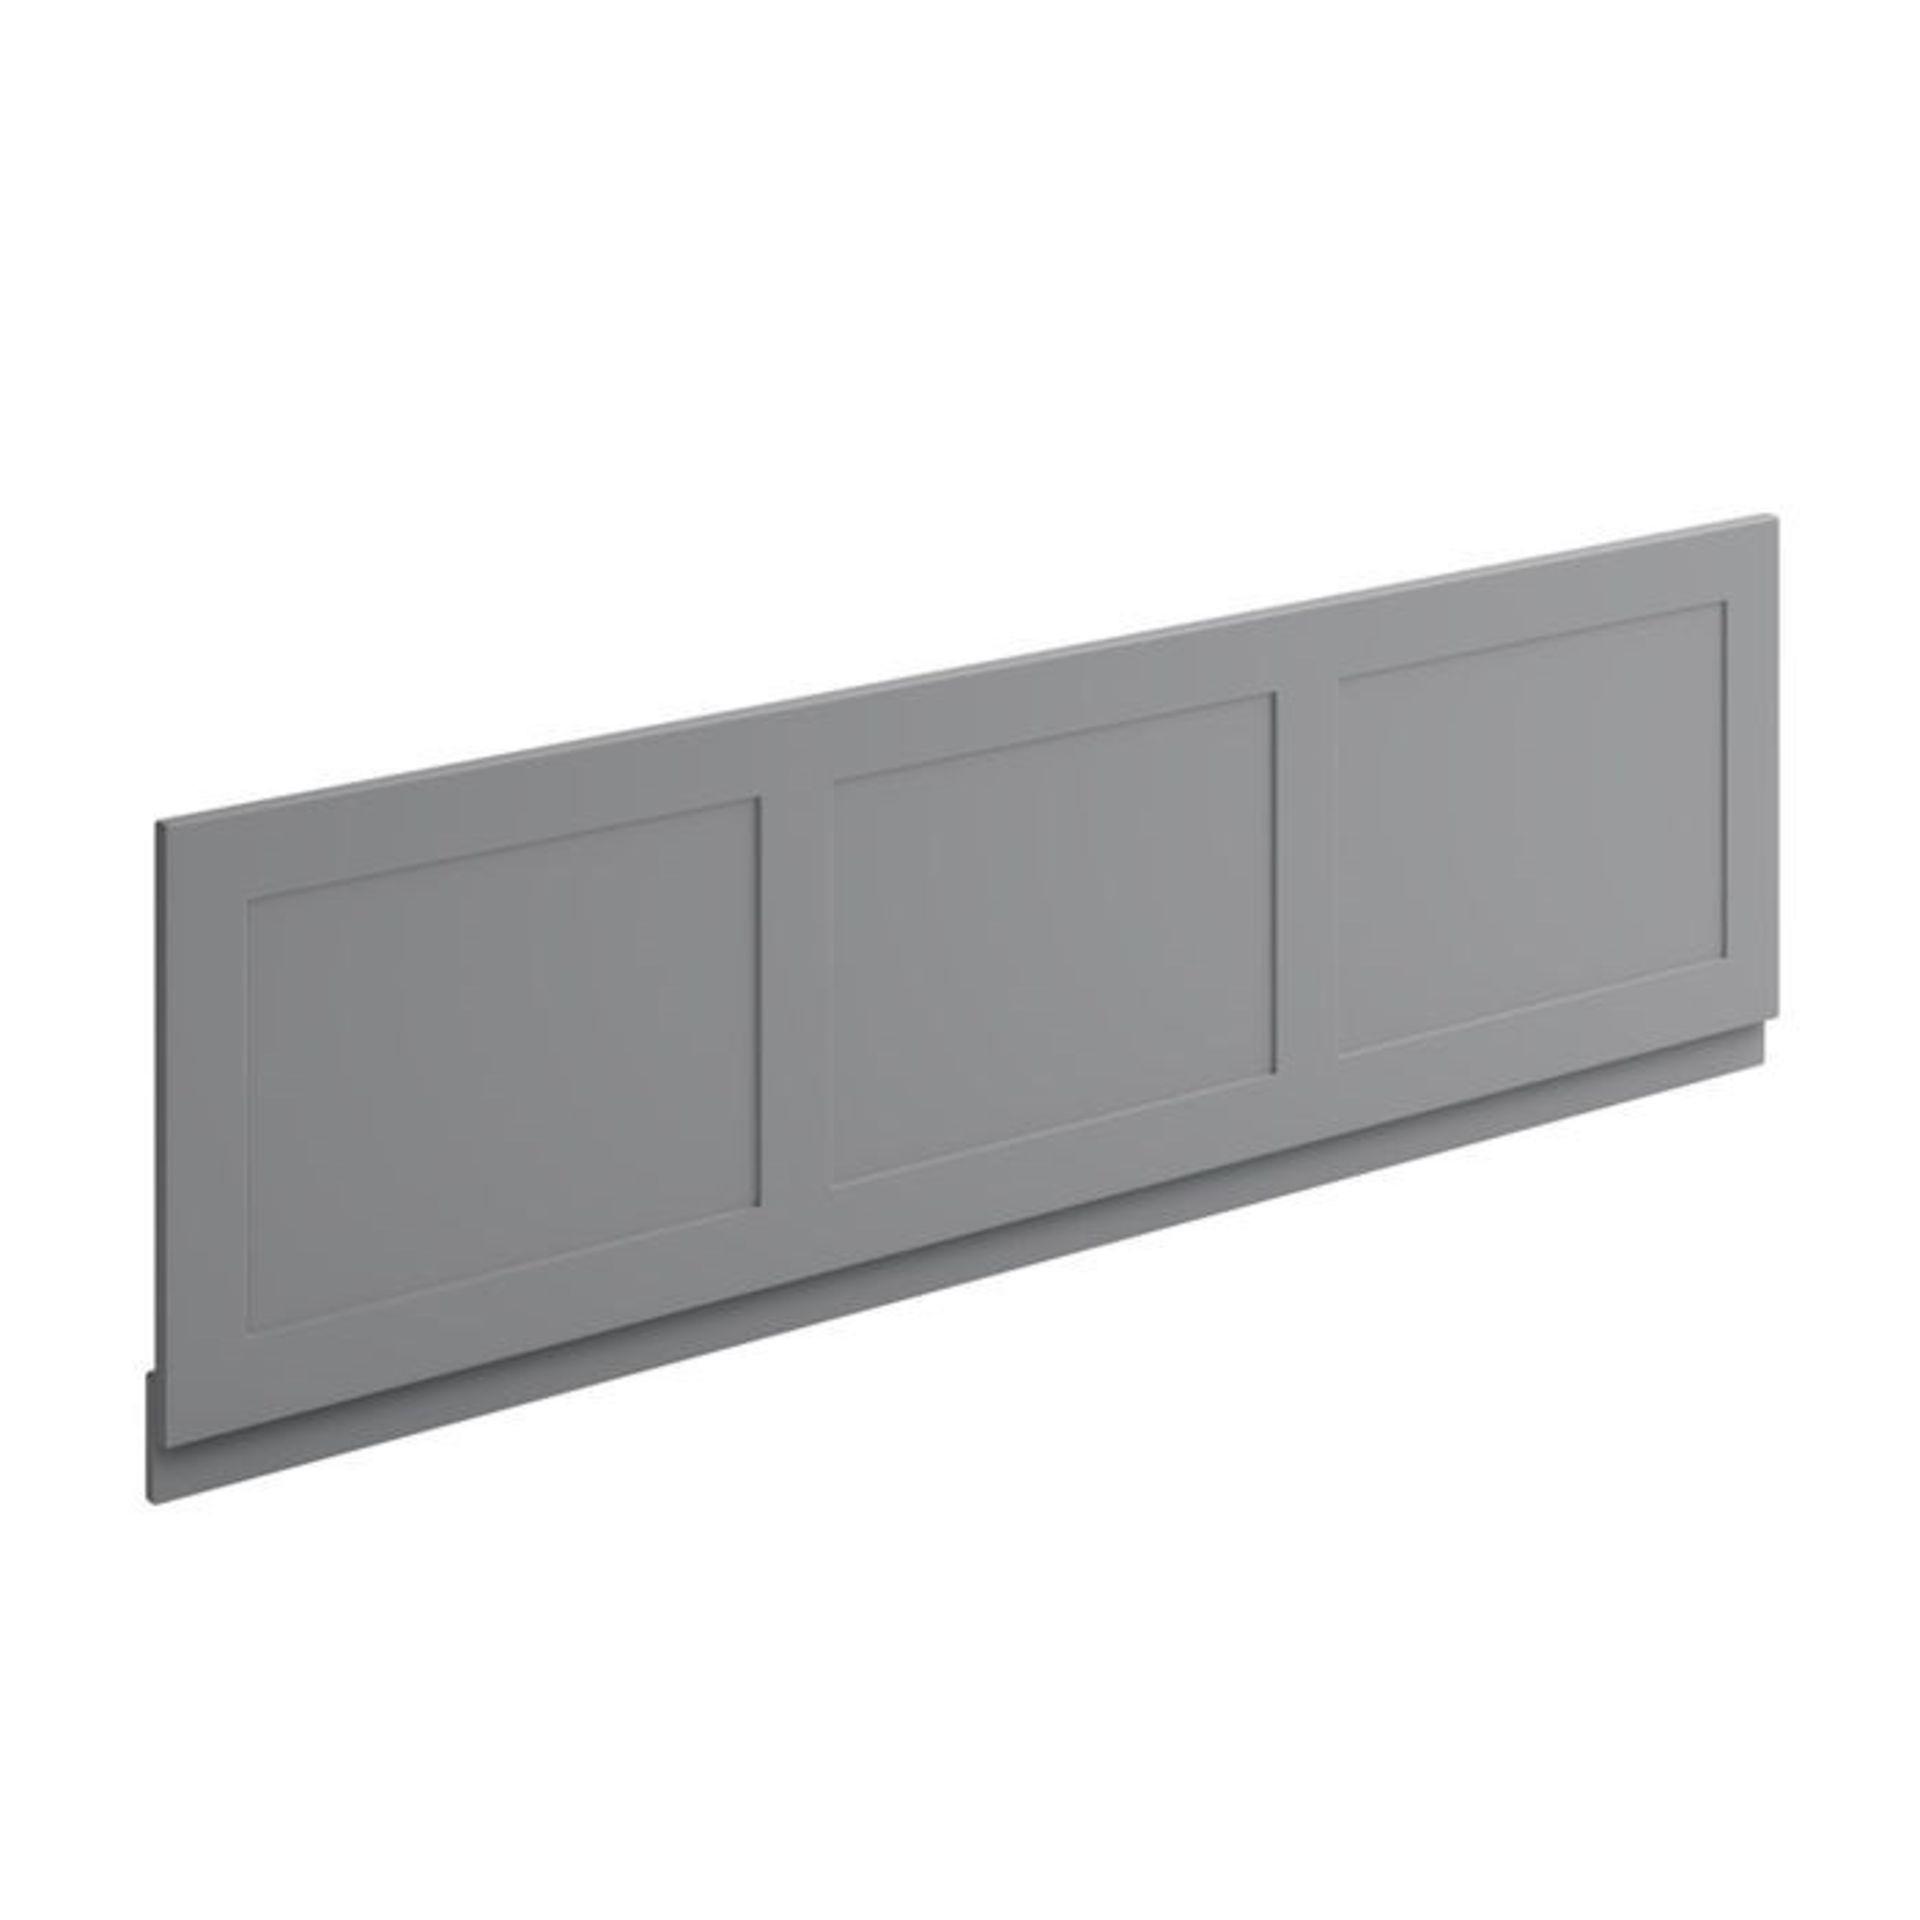 (DW61) 1800mm Melbourne Straight Bath Front Panel - Earl Grey. RRP £139.99. Traditional Earl ... - Image 2 of 2